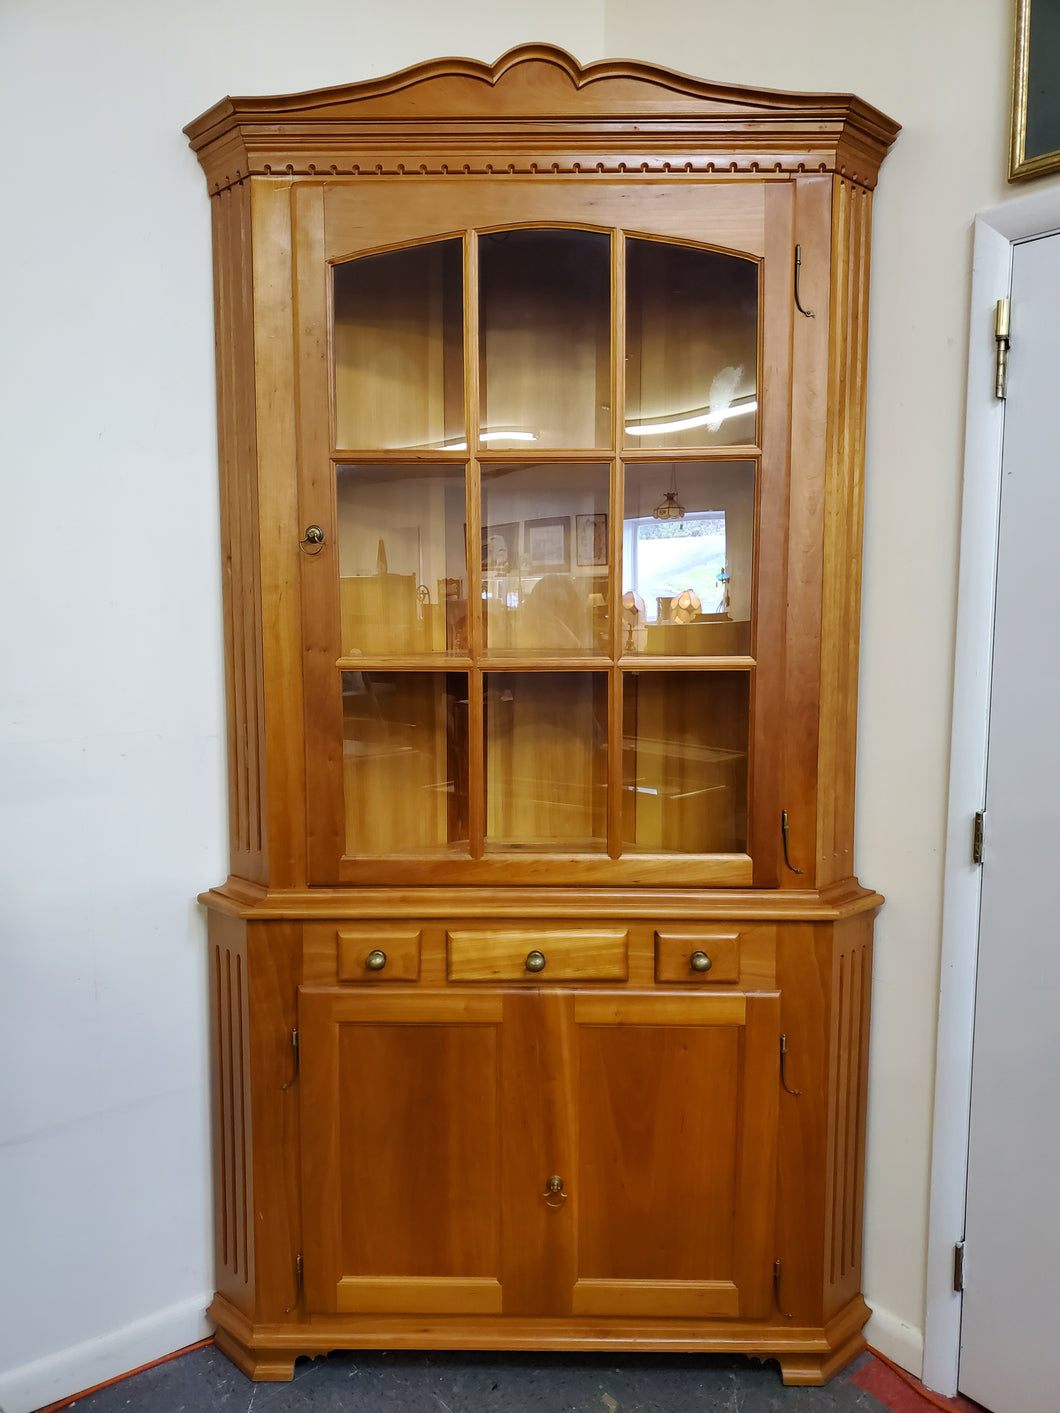 Large Corner Cupboard - 9 Panes - 2 Piece - Hand Crafted